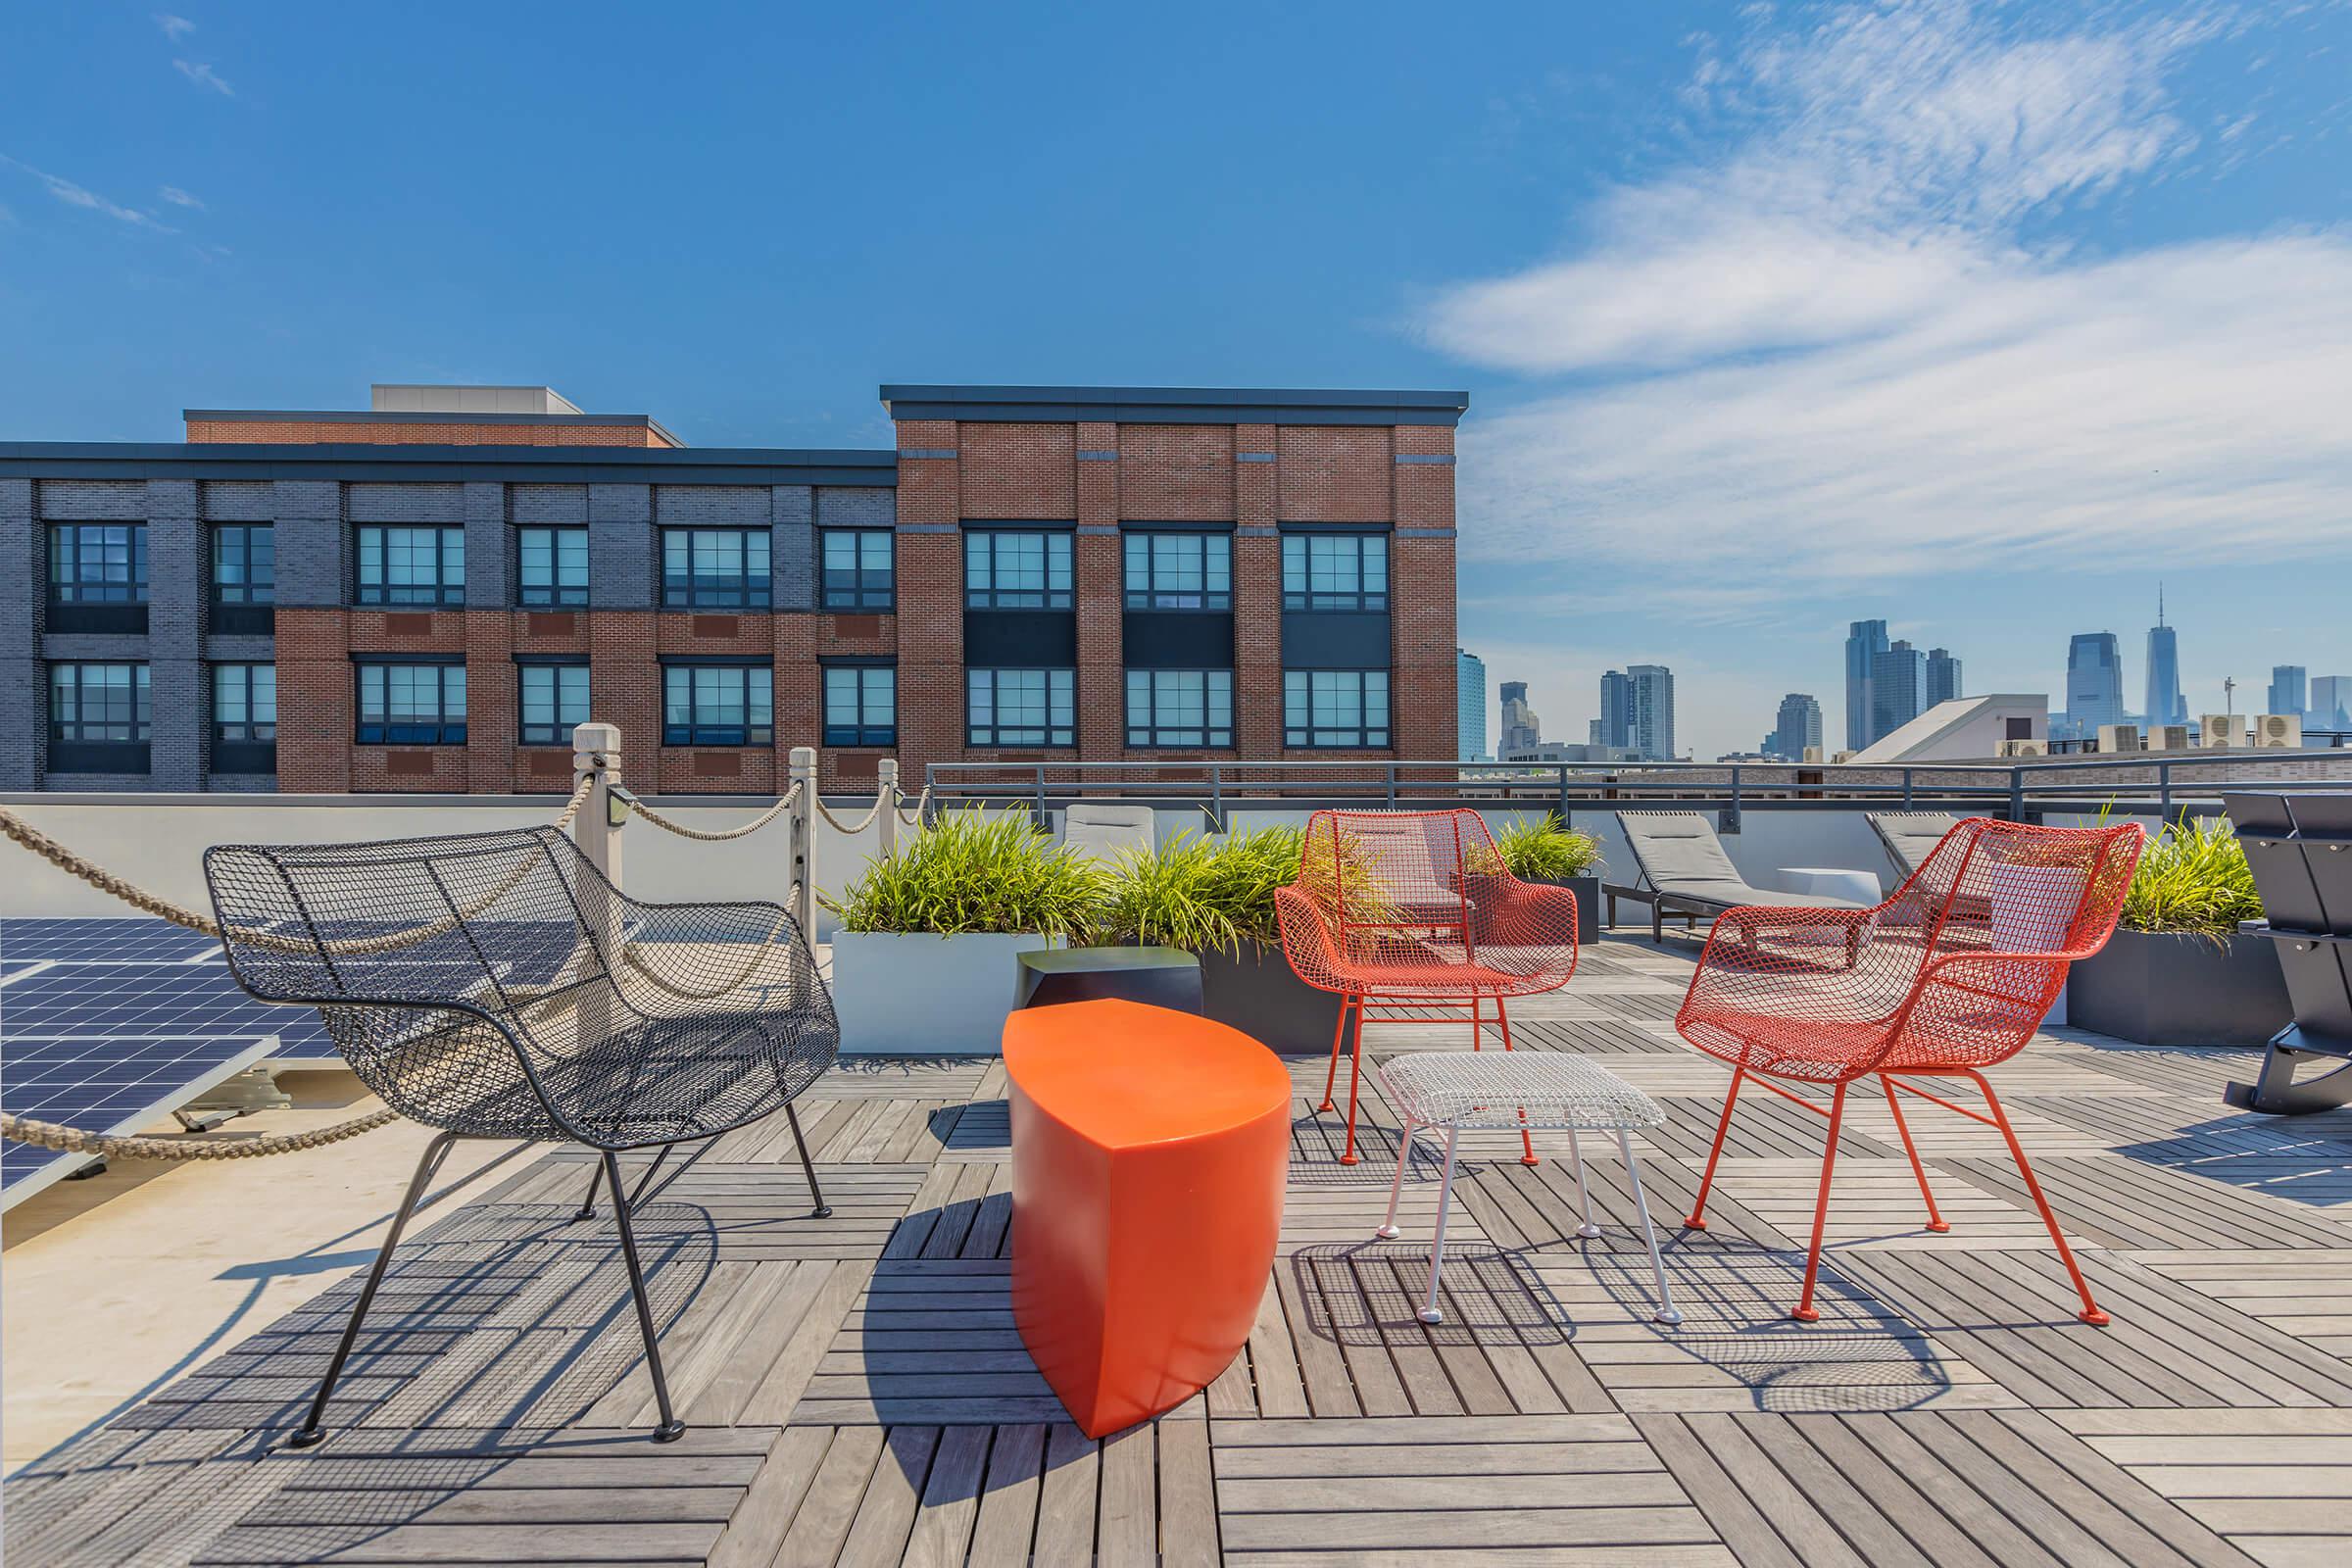  Roof Deck with Views of Manhattan Skylines